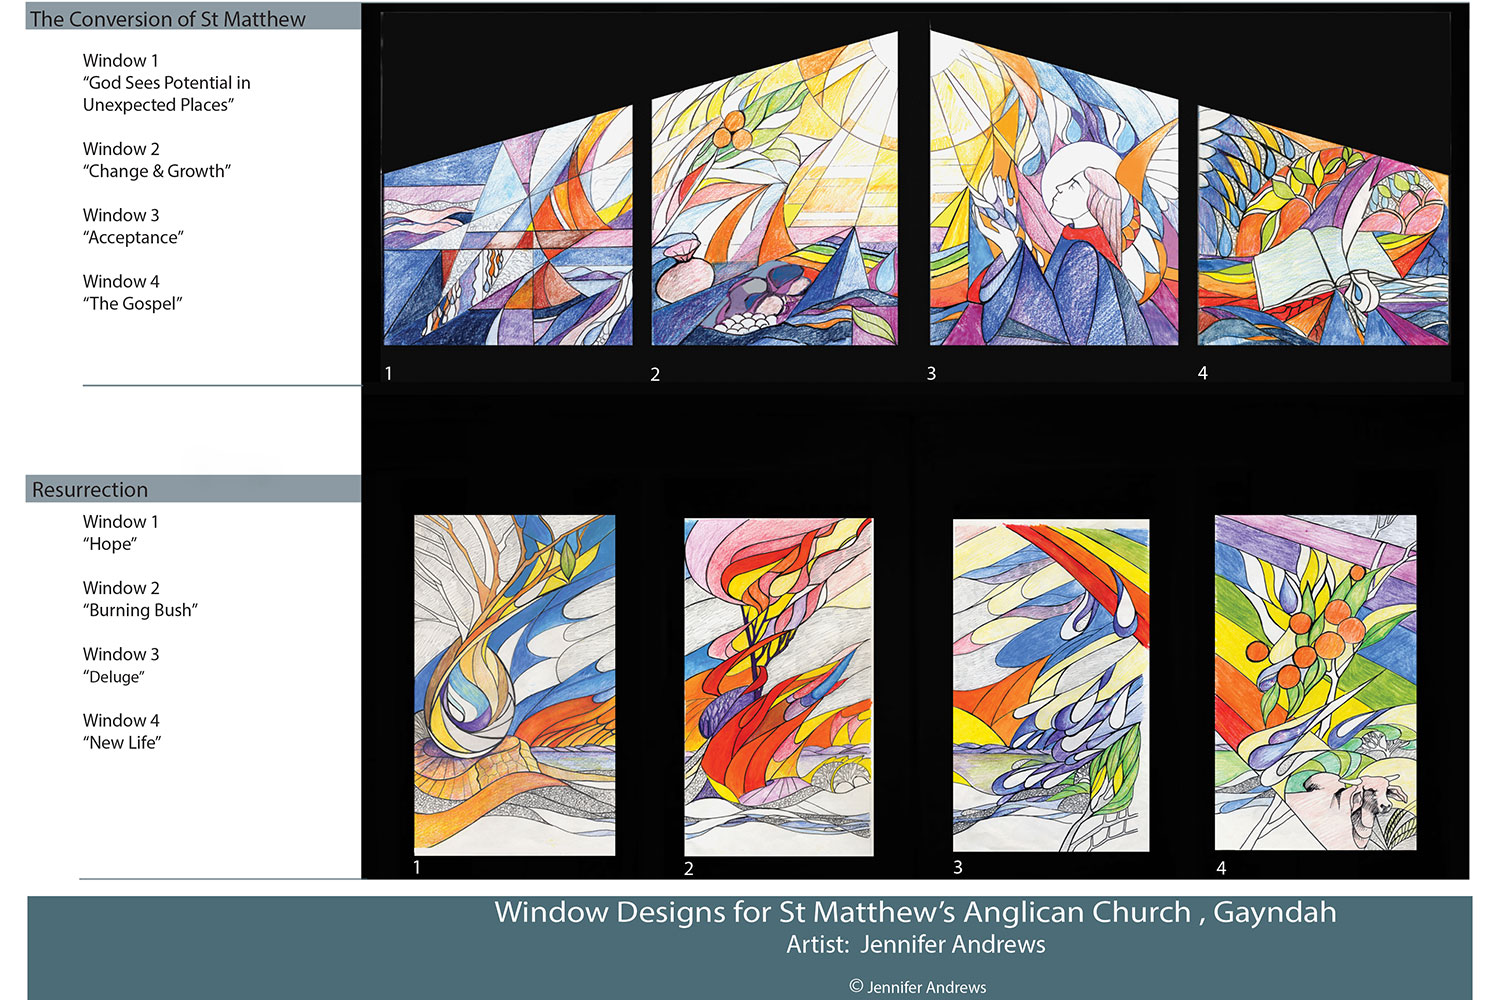 Stained glass window designs for St Matthews Anglican Church Gayndah Qld. Designs by Jennifer Andrews